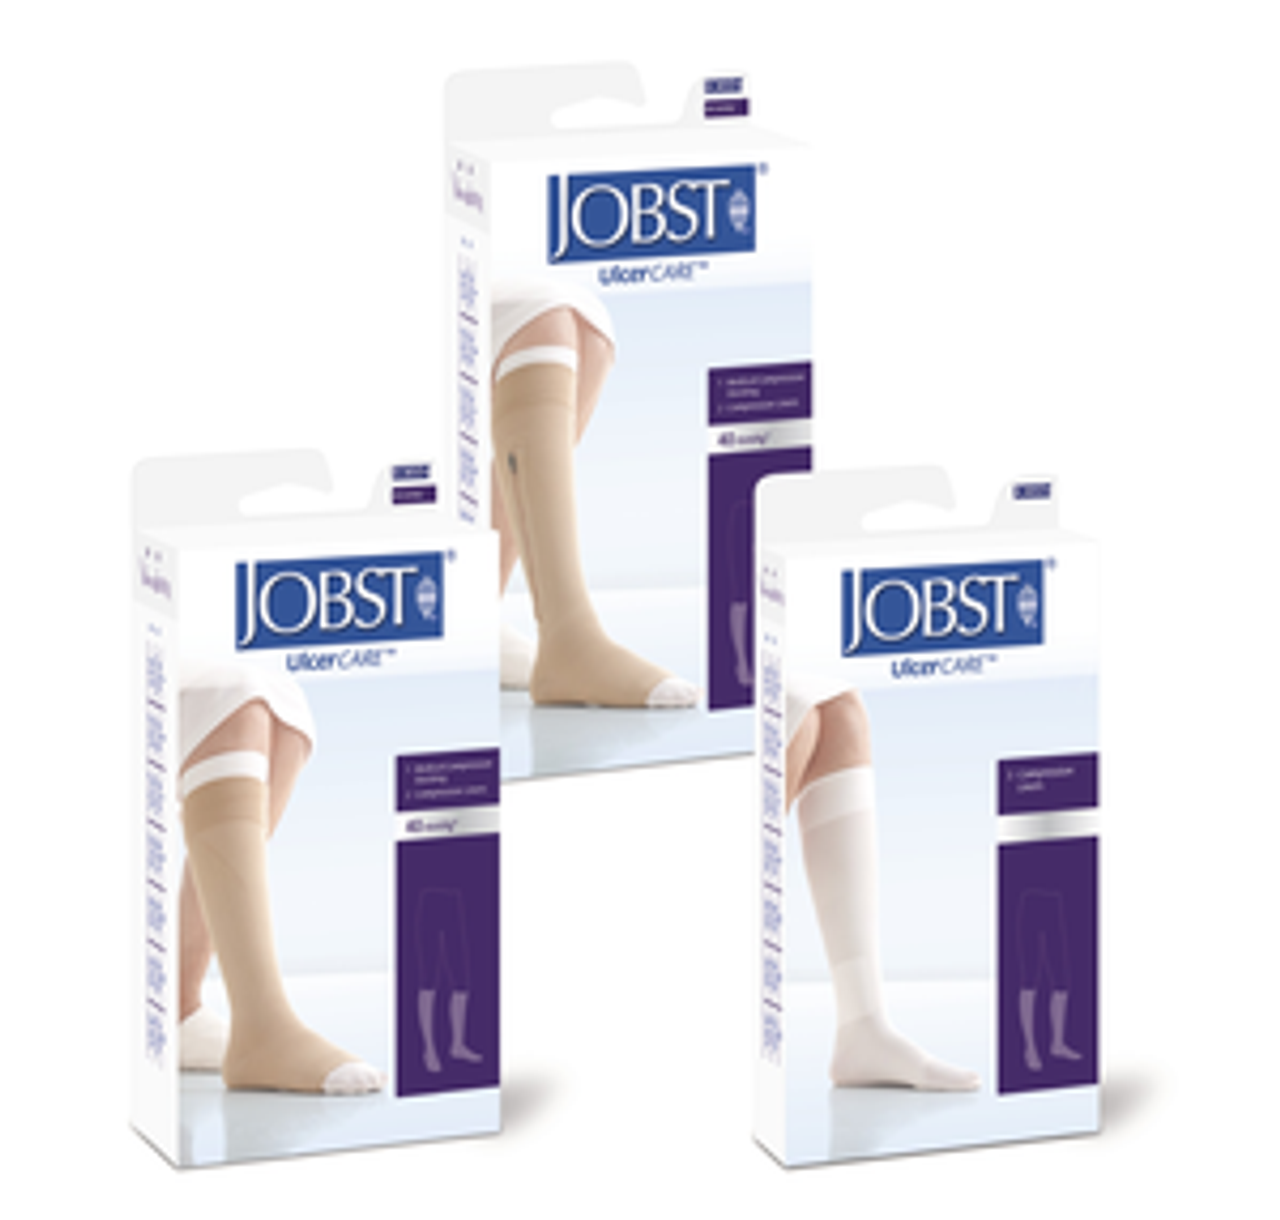 BSN-7363041 KT/1 JOBST ULCERCARE READY-TO-WEAR SM, NO ZIPPER, BLACK (INCL 1 STOCKING AND 2 LINERS)